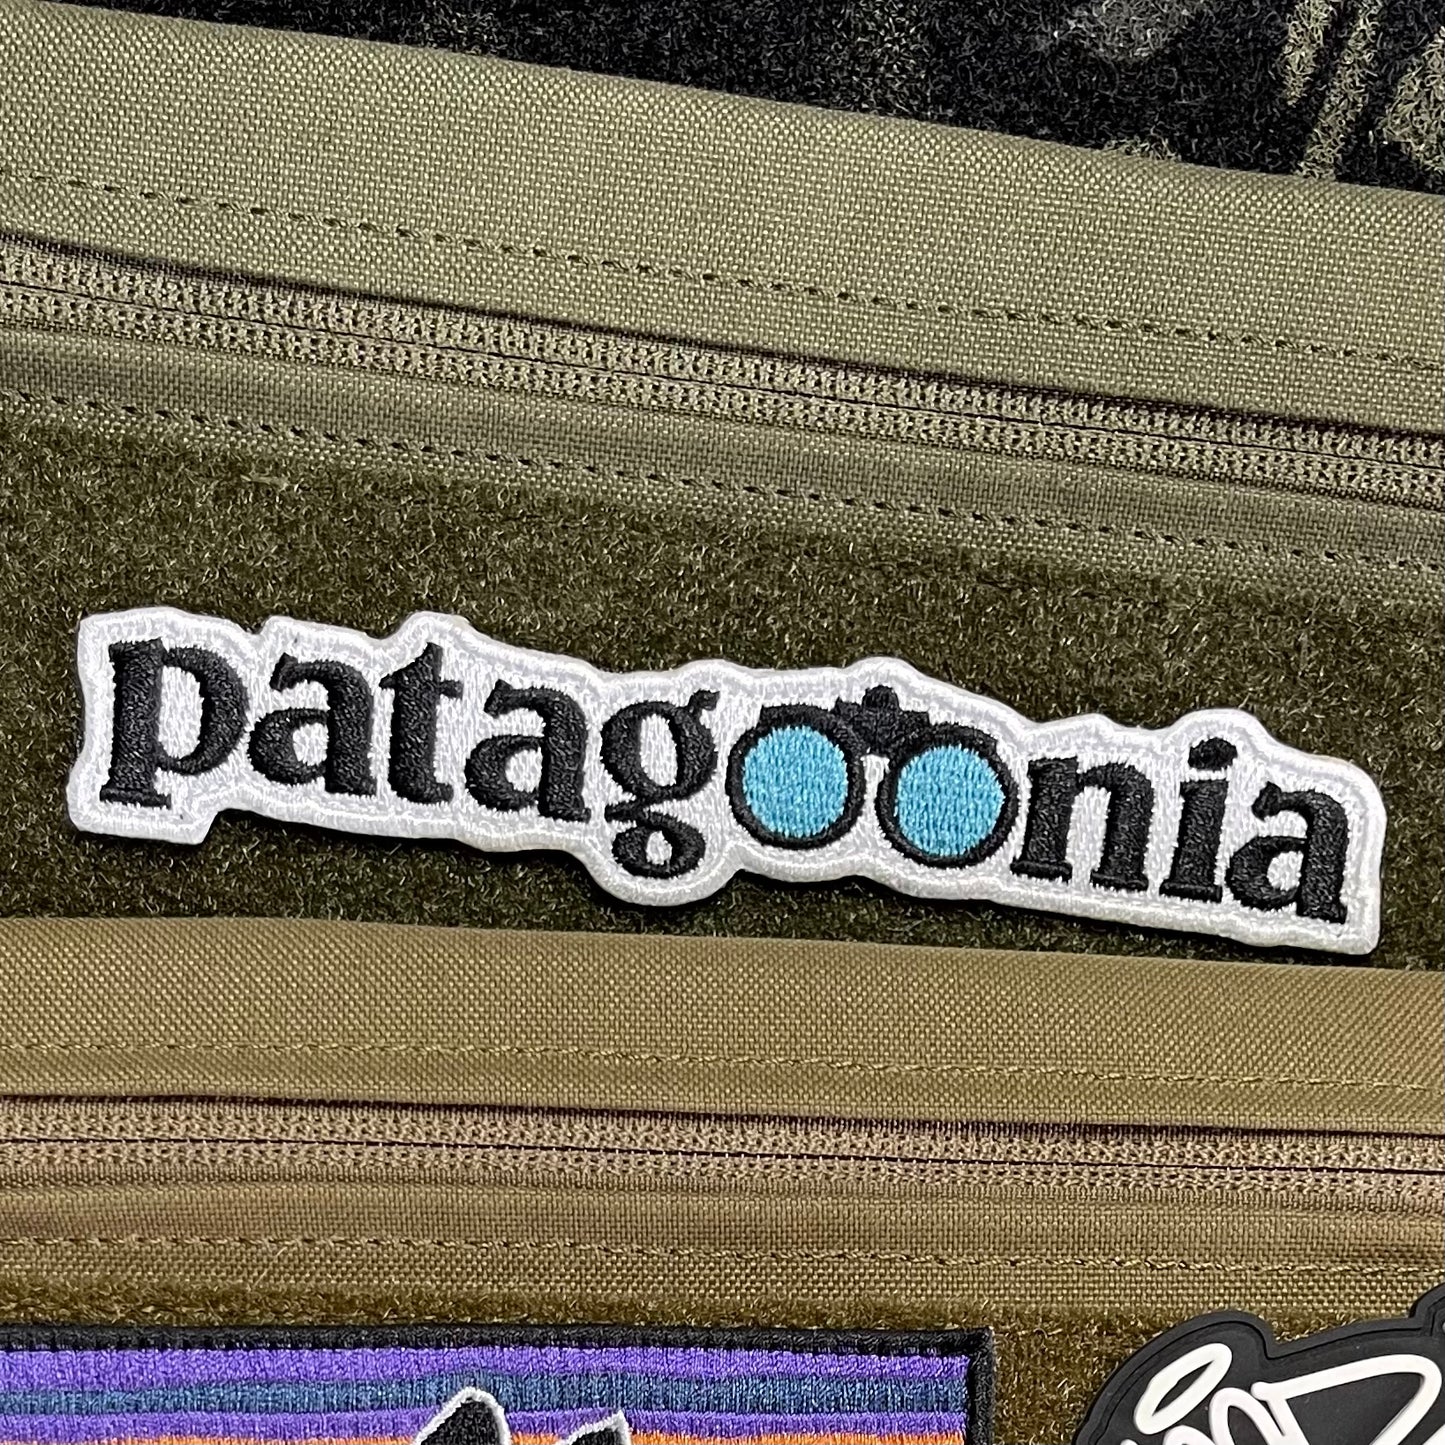 PataGOONia NVG patch